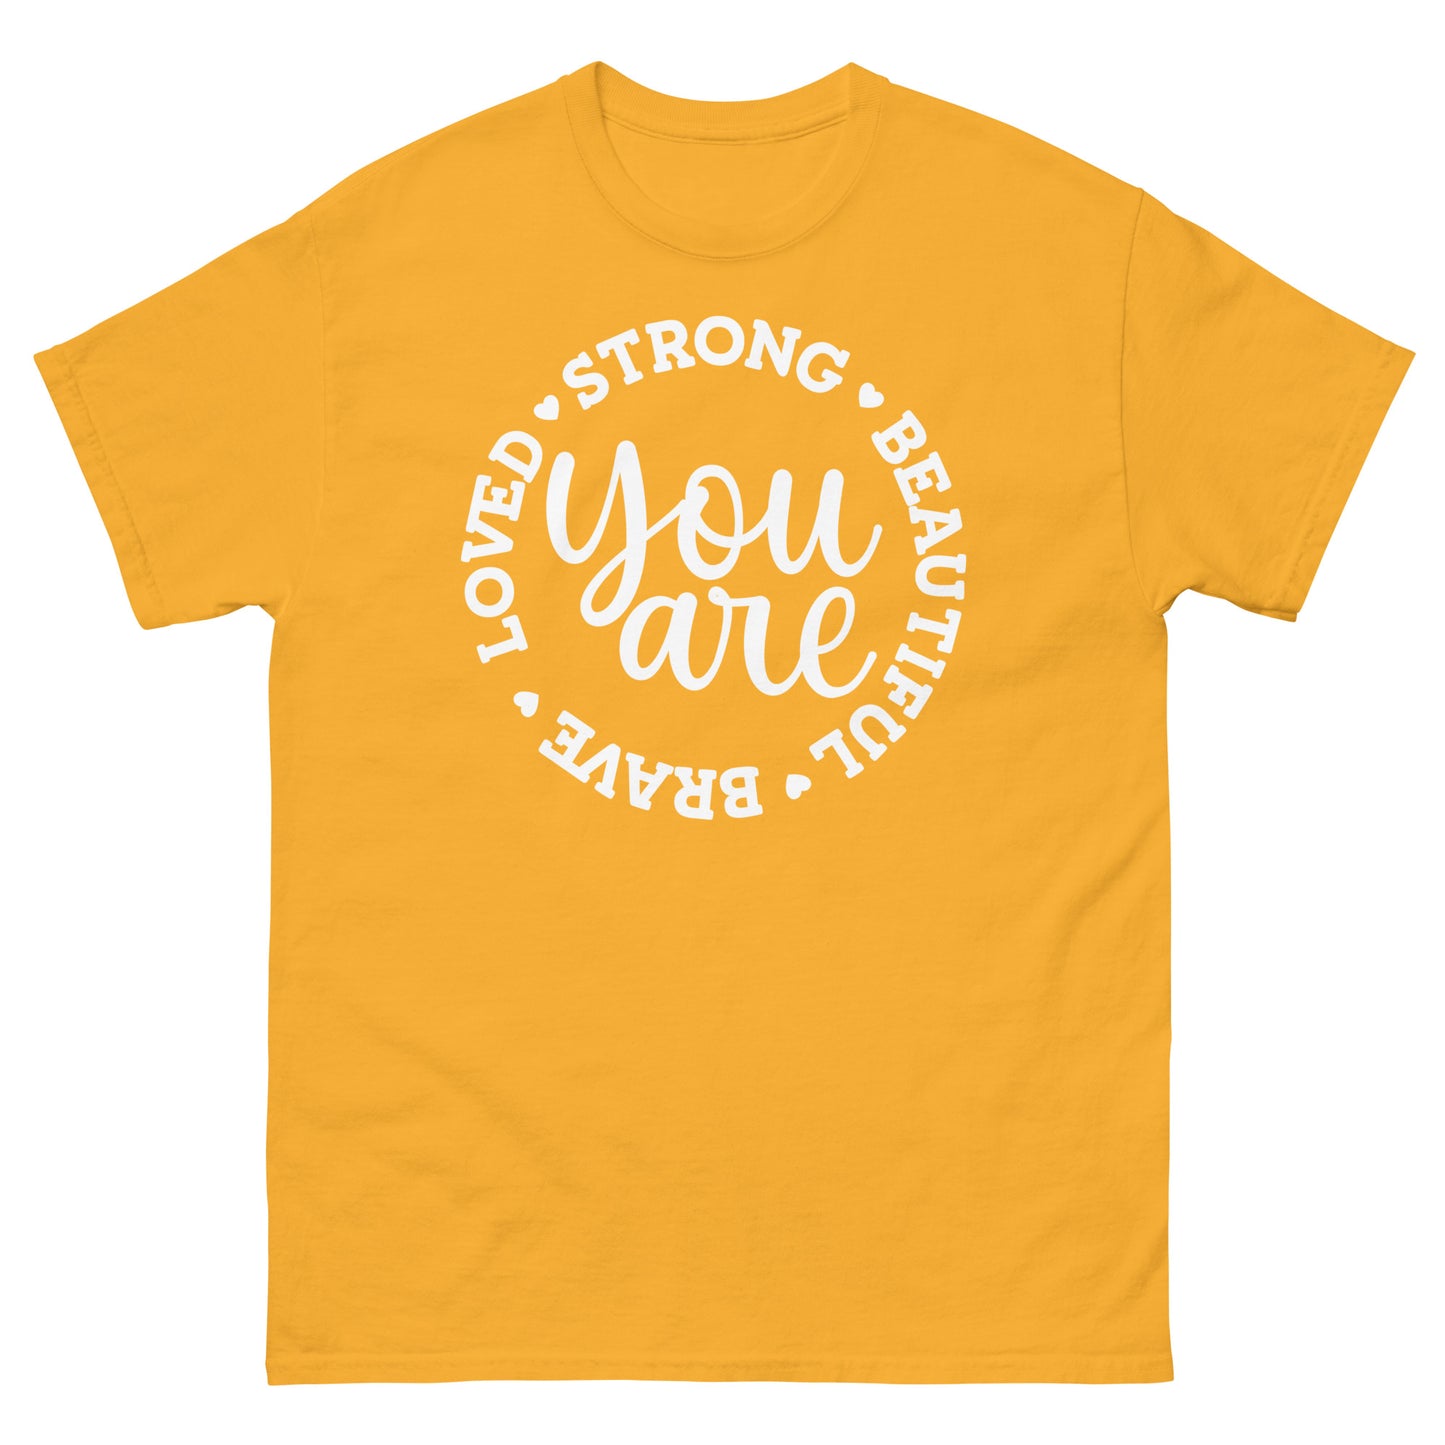 You are brave strong love beautiful - classic tee